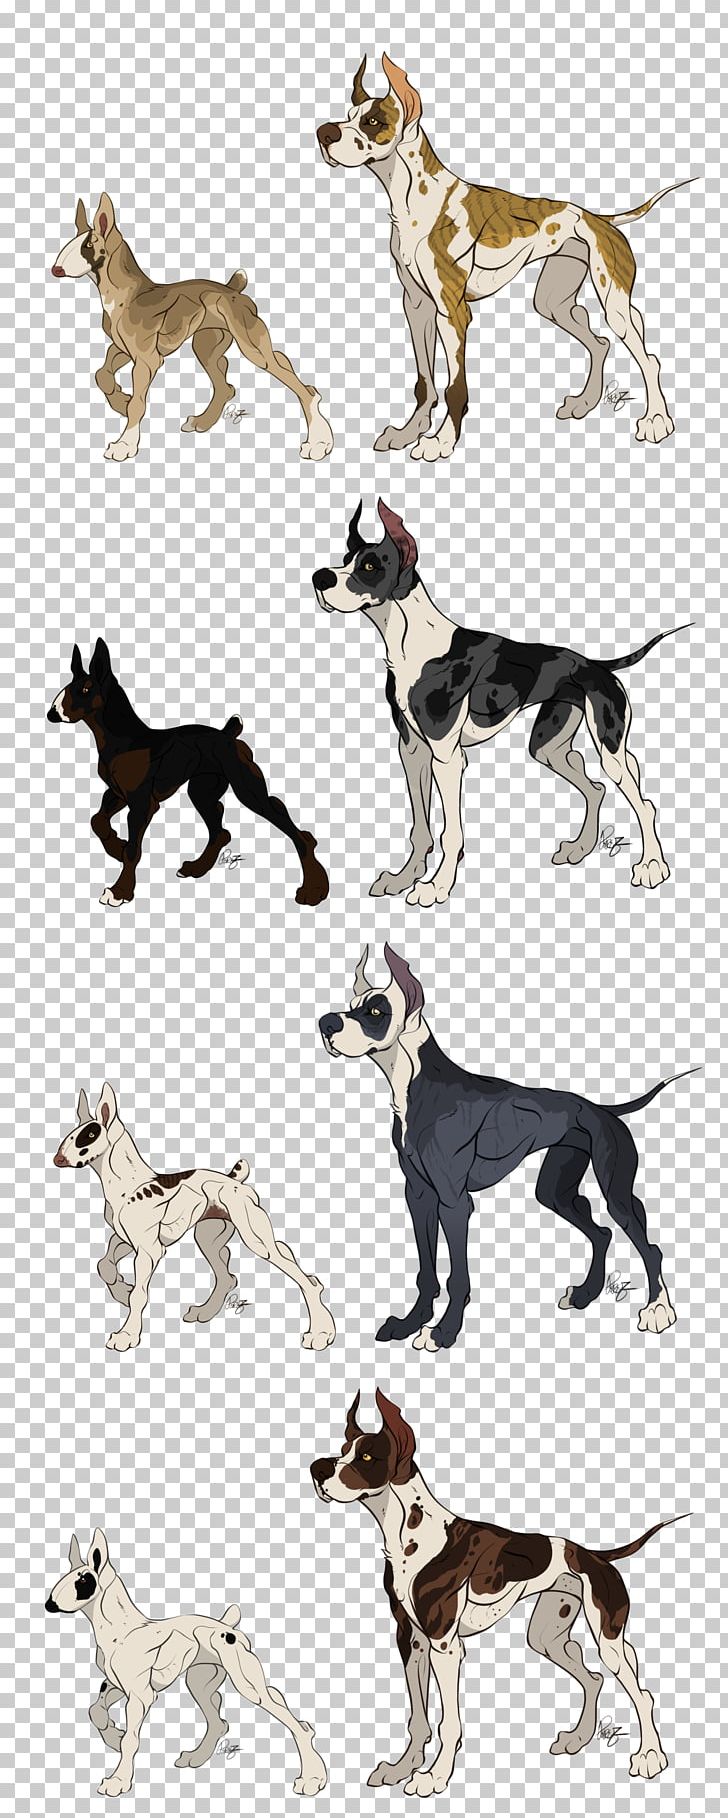 Dog Breed Whippet Crossbreed 08626 PNG, Clipart, Breed, Carnivoran, Crossbreed, Dog, Dog Breed Free PNG Download